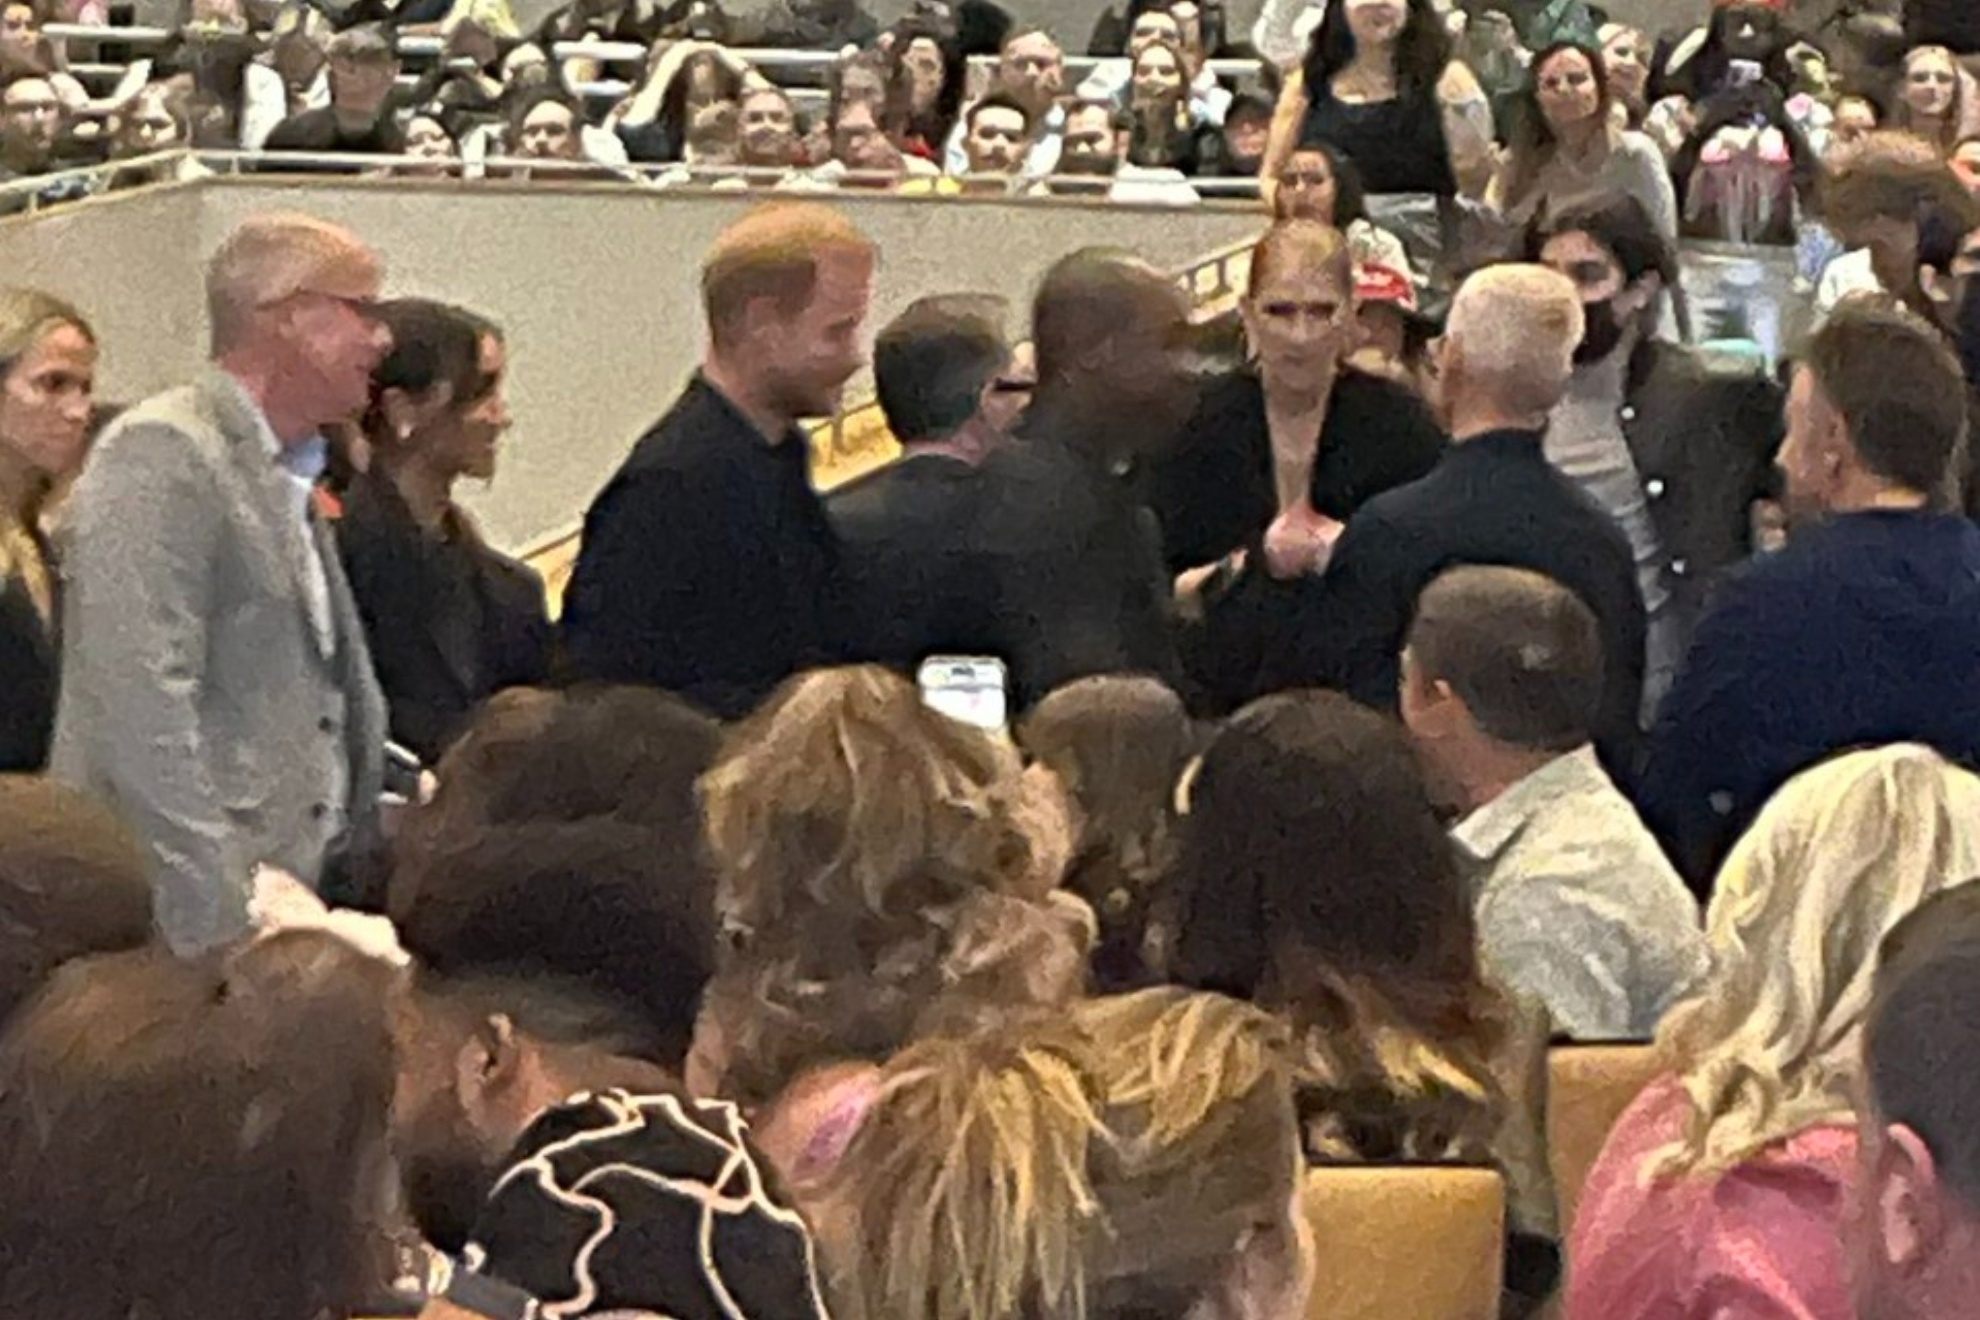 Prince Harry and Meghan were spoted at Katy Perrys Vegas finale.